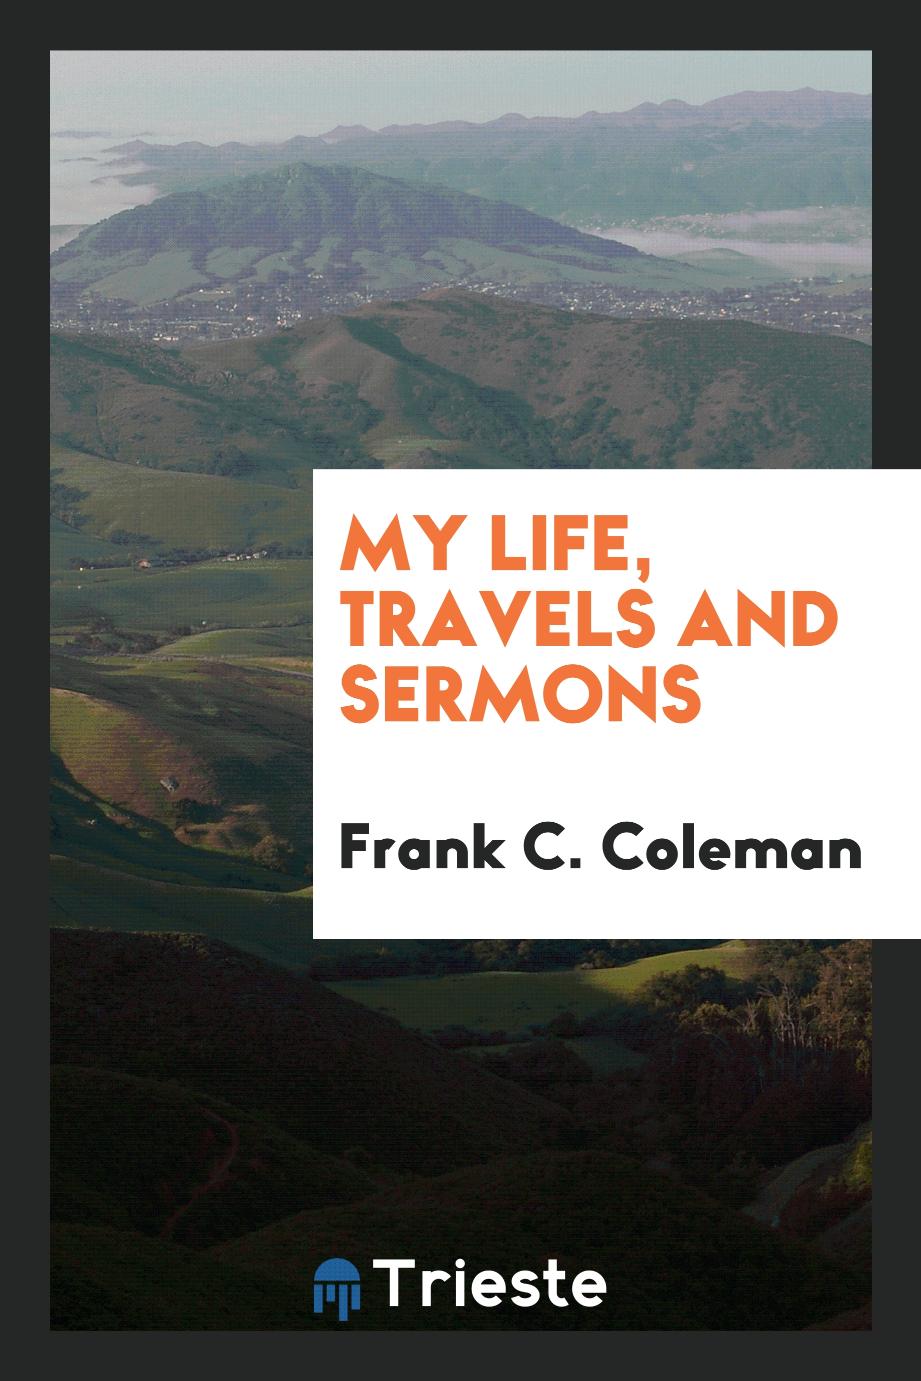 My life, travels and sermons